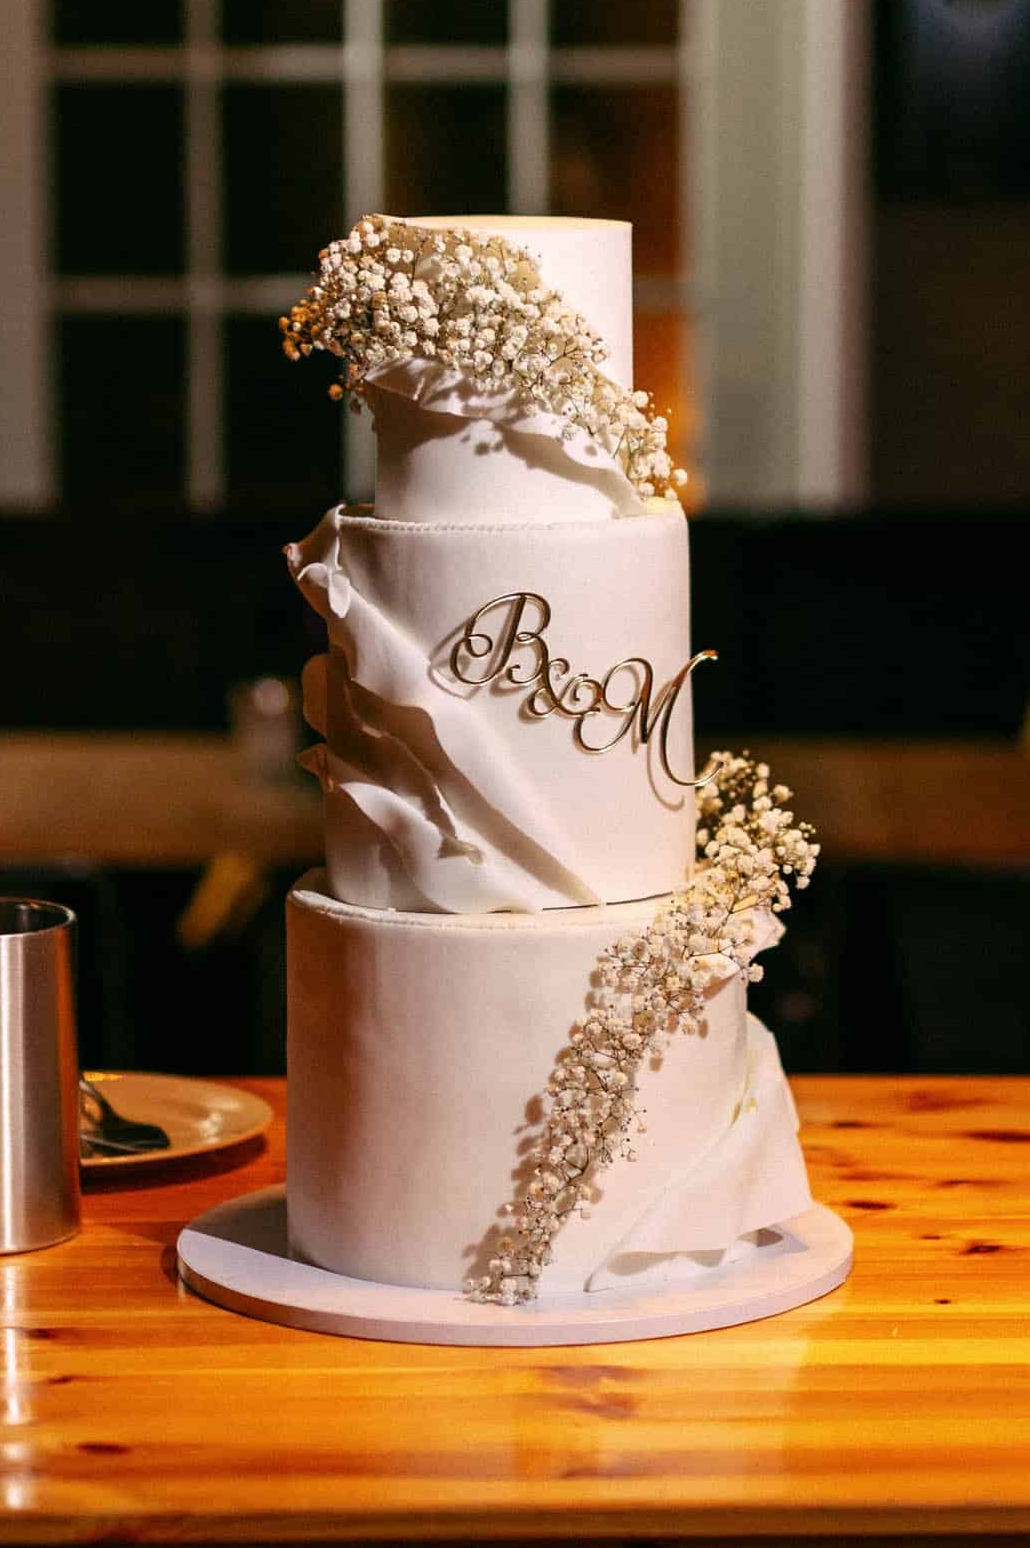 A wedding cake on a wooden table.